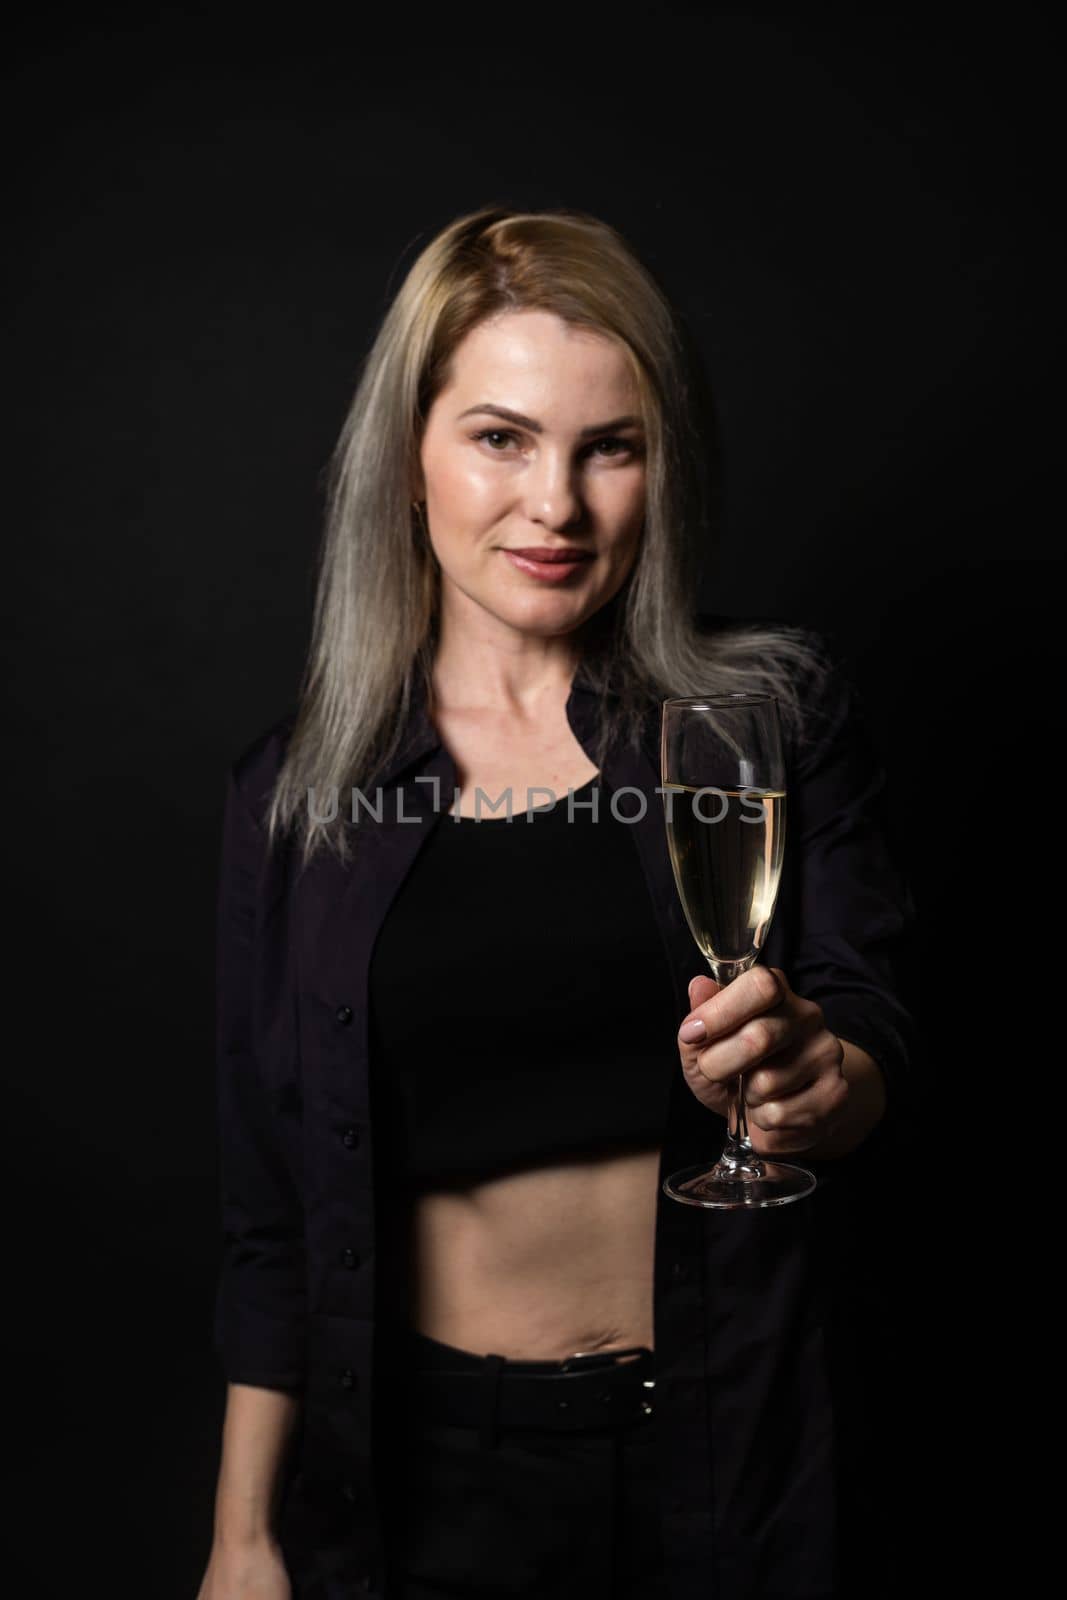 woman with a glass on a black background by Andelov13